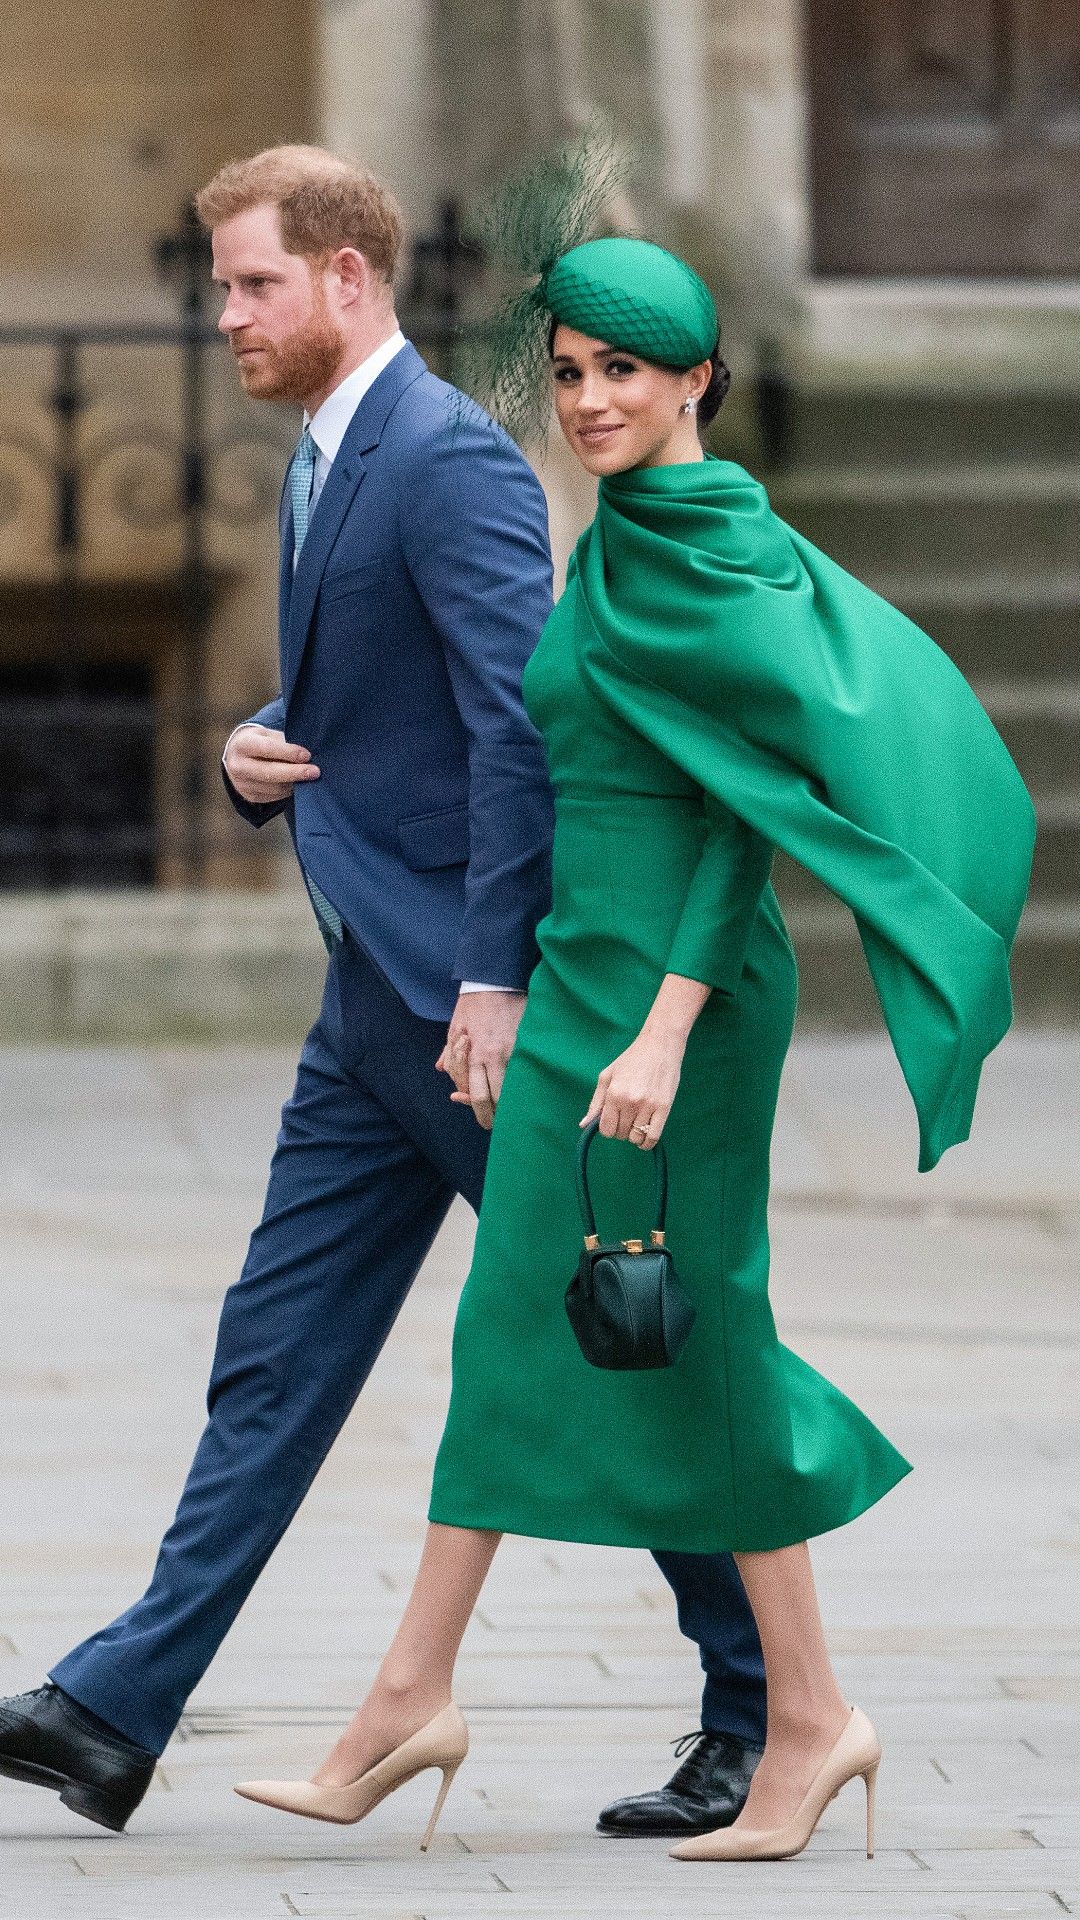 <p>                     Prince Harry and Meghan, Duchess of Sussex marked their final engagement as senior members of the royal family on March 9, 2020, attending the annual Commonwealth Service at Westminster Abbey.                   </p>                                      <p>                     Meghan arrived in an emerald green dress, with a matching cape, bag and fascinator. Harry matched her subtly in a blue suit with a green lining.                   </p>